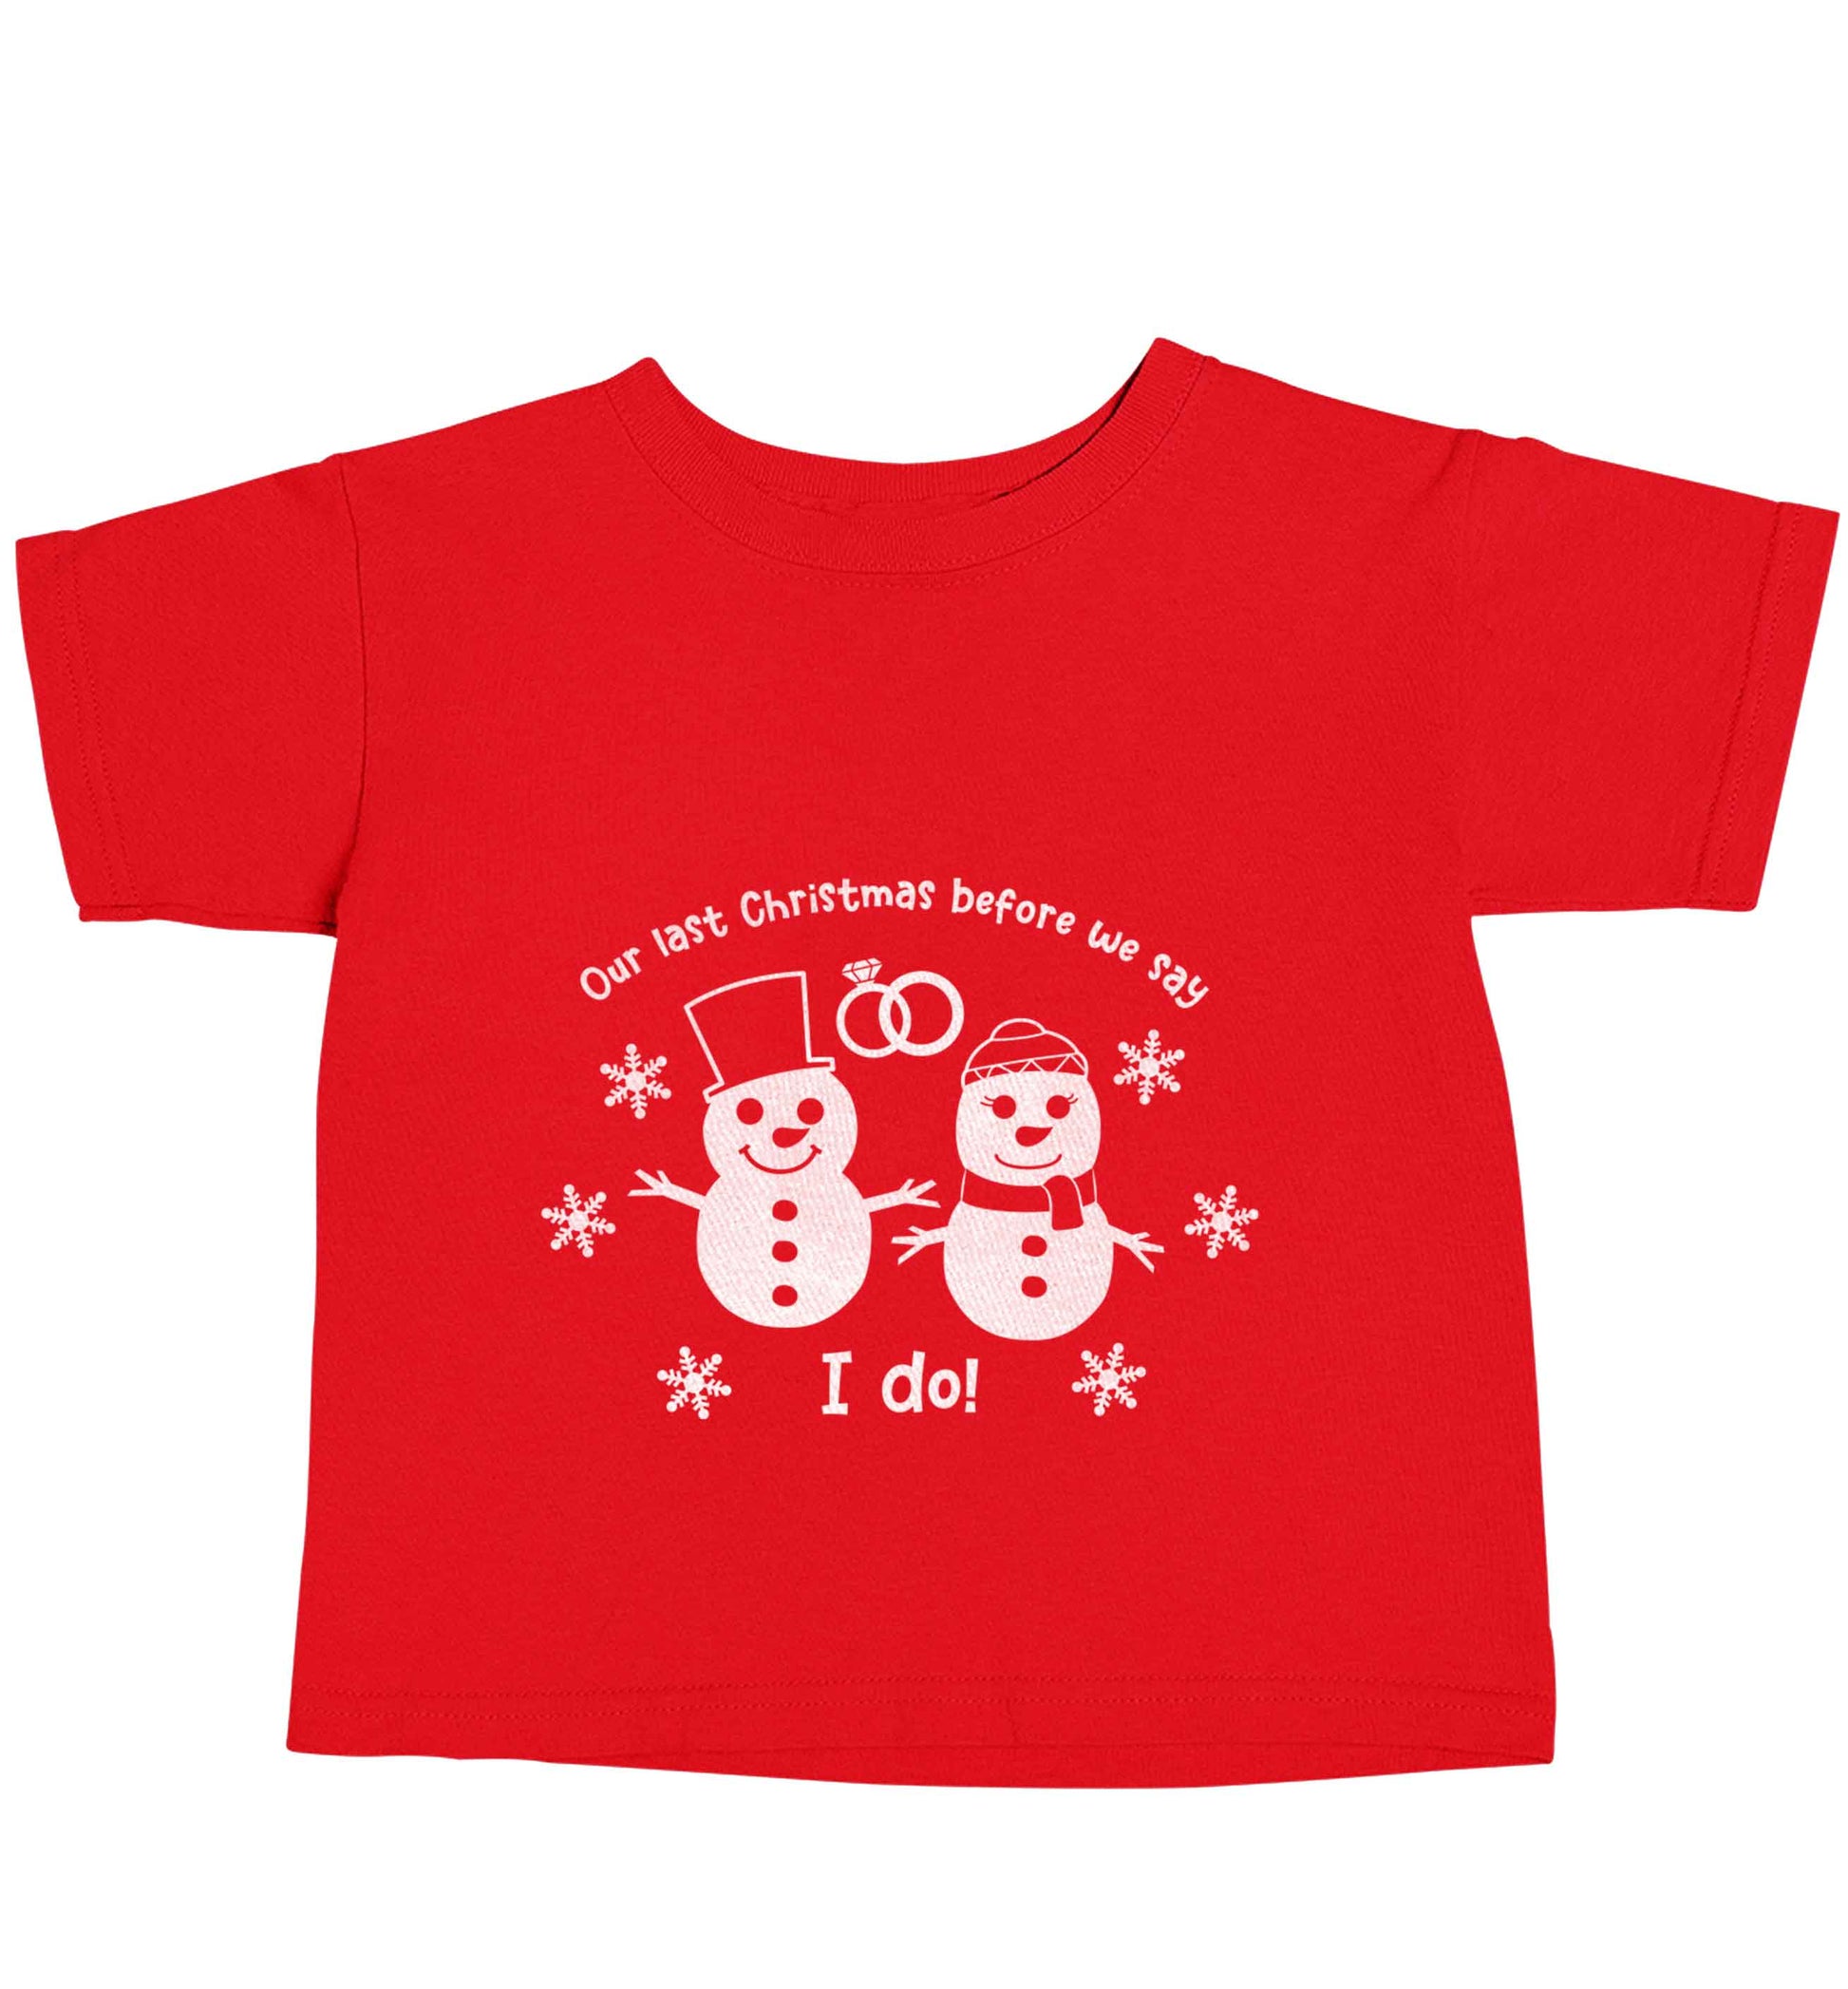 Last Christmas before we say I do red baby toddler Tshirt 2 Years